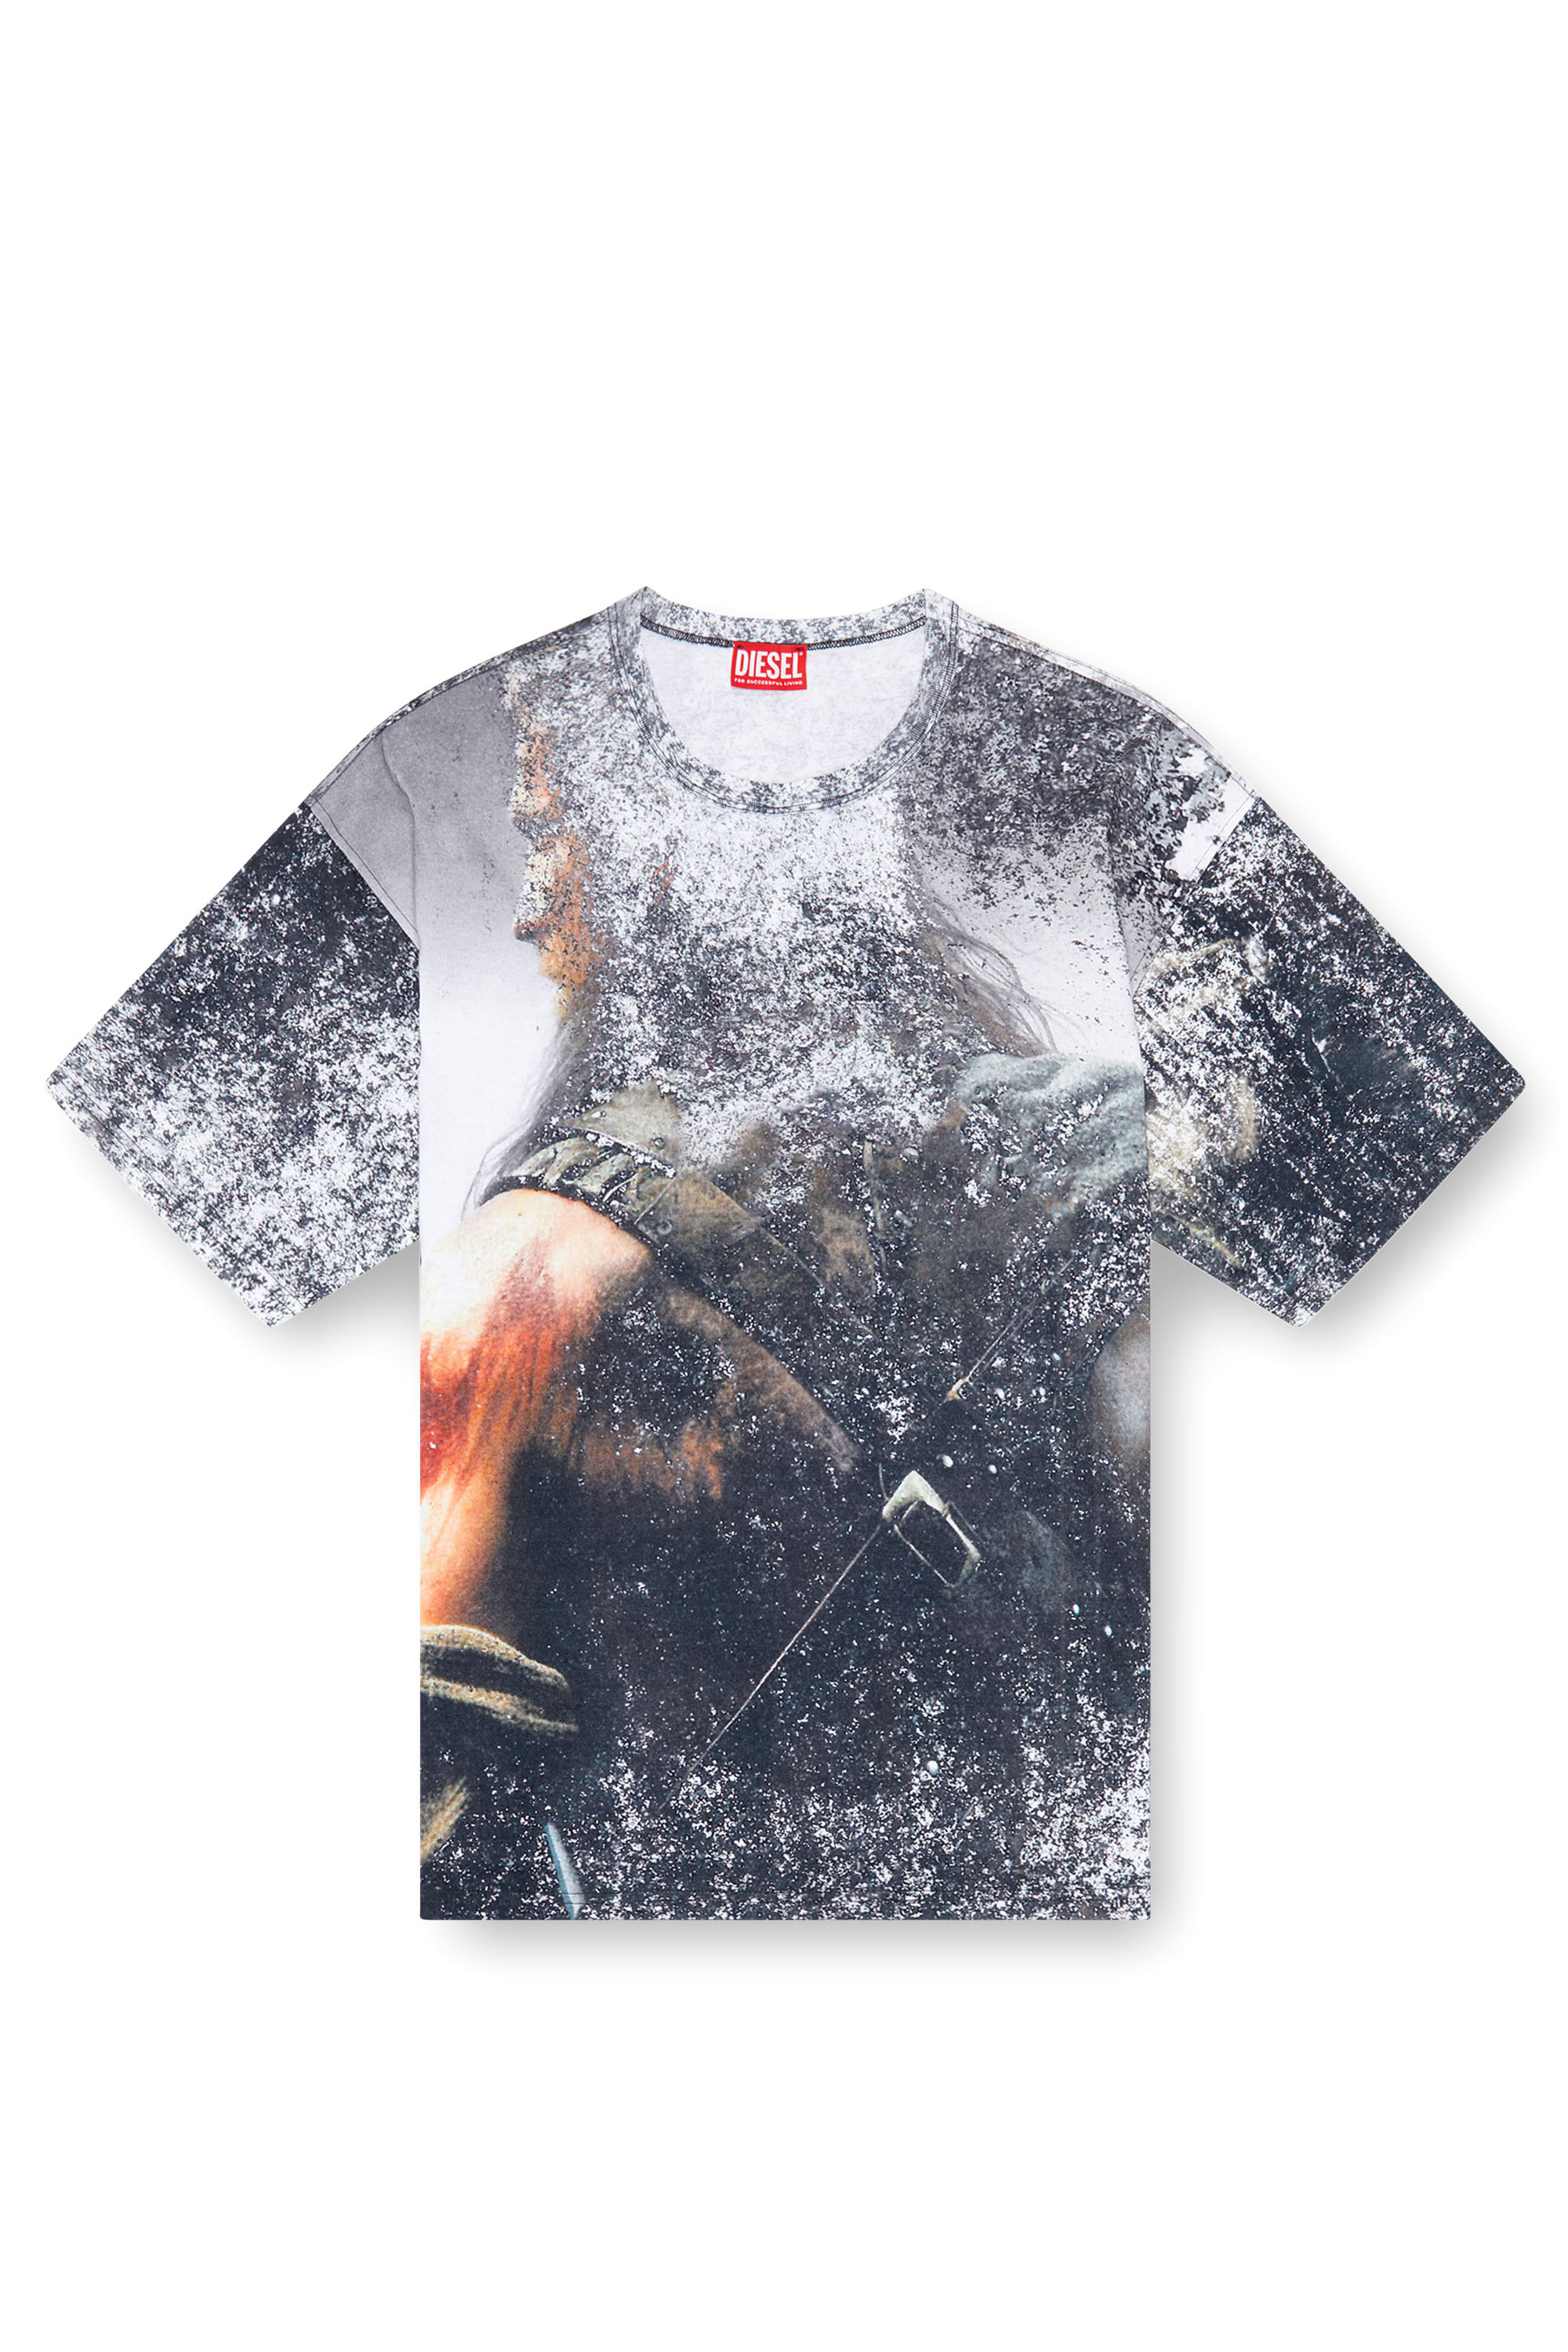 Diesel - T-BOXT-Q21, Male T-shirt with movie poster print in ブラック - Image 3